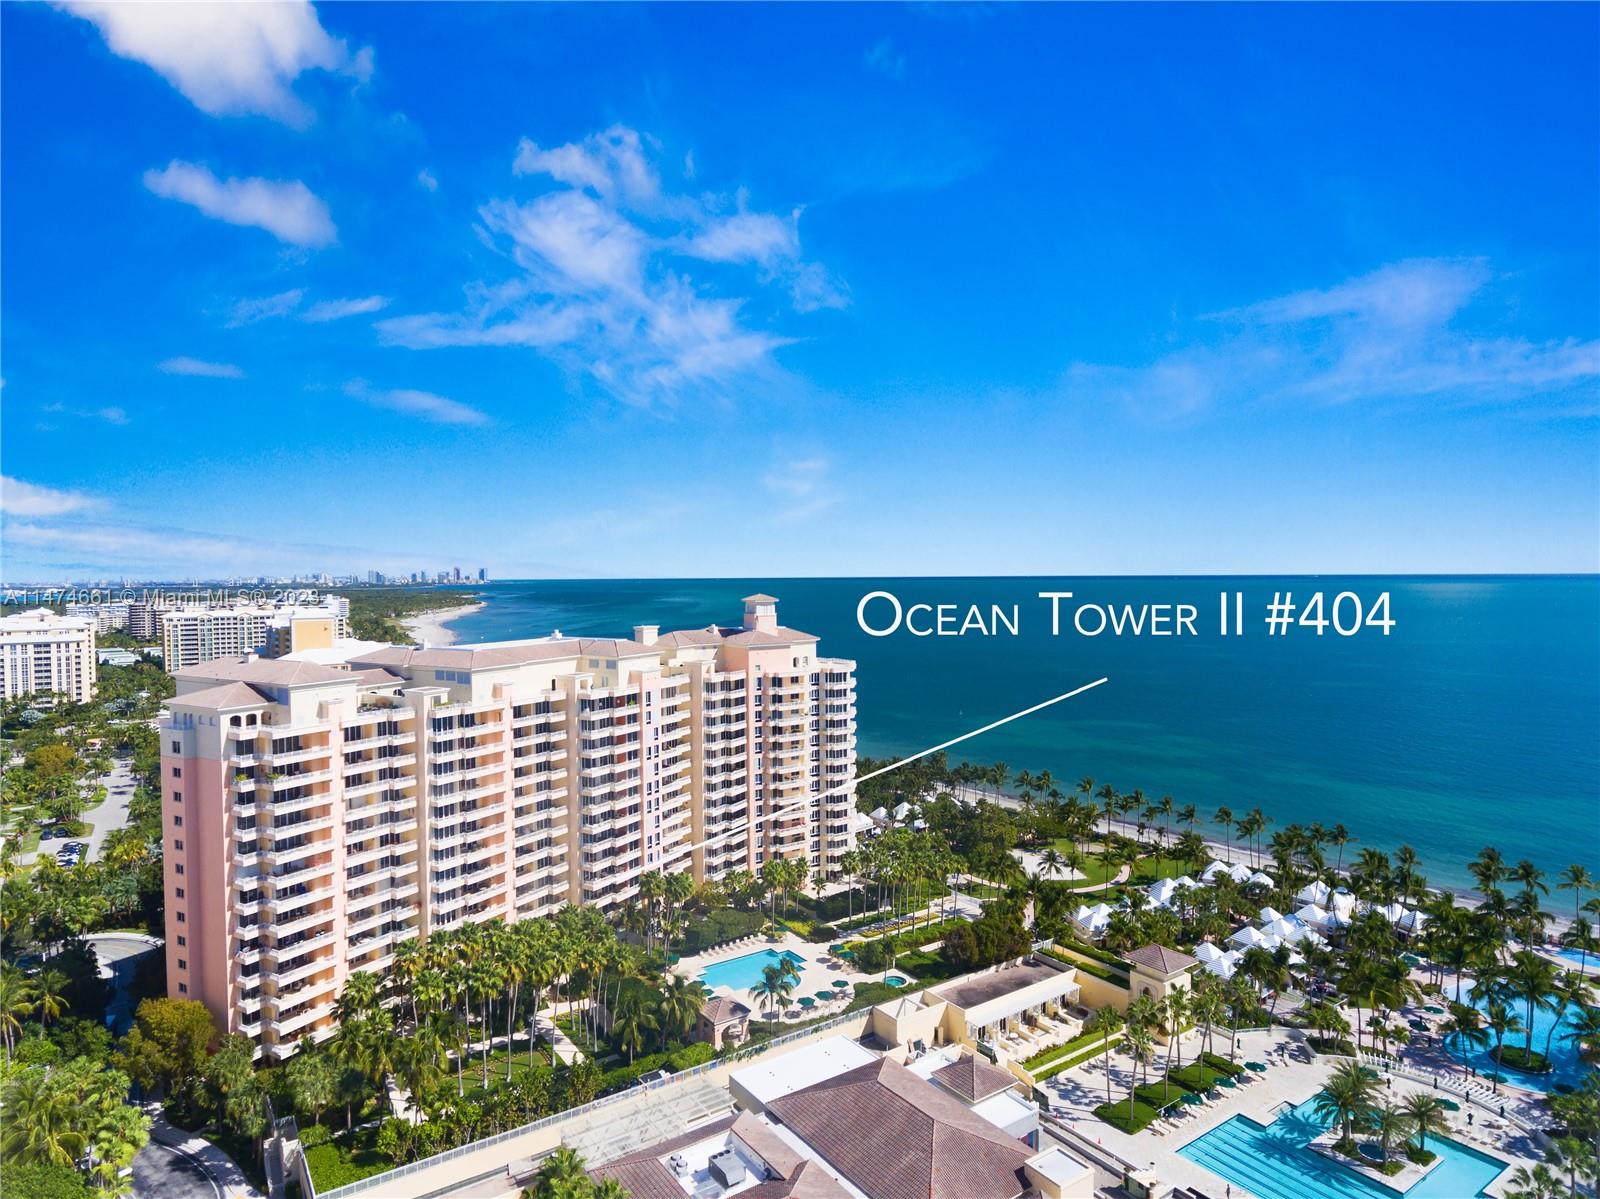 Beautiful 3BR, 3 BA in one of the most sought-after buildings on Key Biscayne - Ocean Tower 2 @ The Ocean Club. Marble floors throughout. Enjoy 5-star resort-style living and full amenities including: The Tennis center, Spa, Fitness center, Salon, 3 different pools, Al fresco and formal dining. Conveniently located with easy access to Brickell, Downtown Miami + quick access to the airport. *2 assigned parking, 24 HR concierge, security & vale